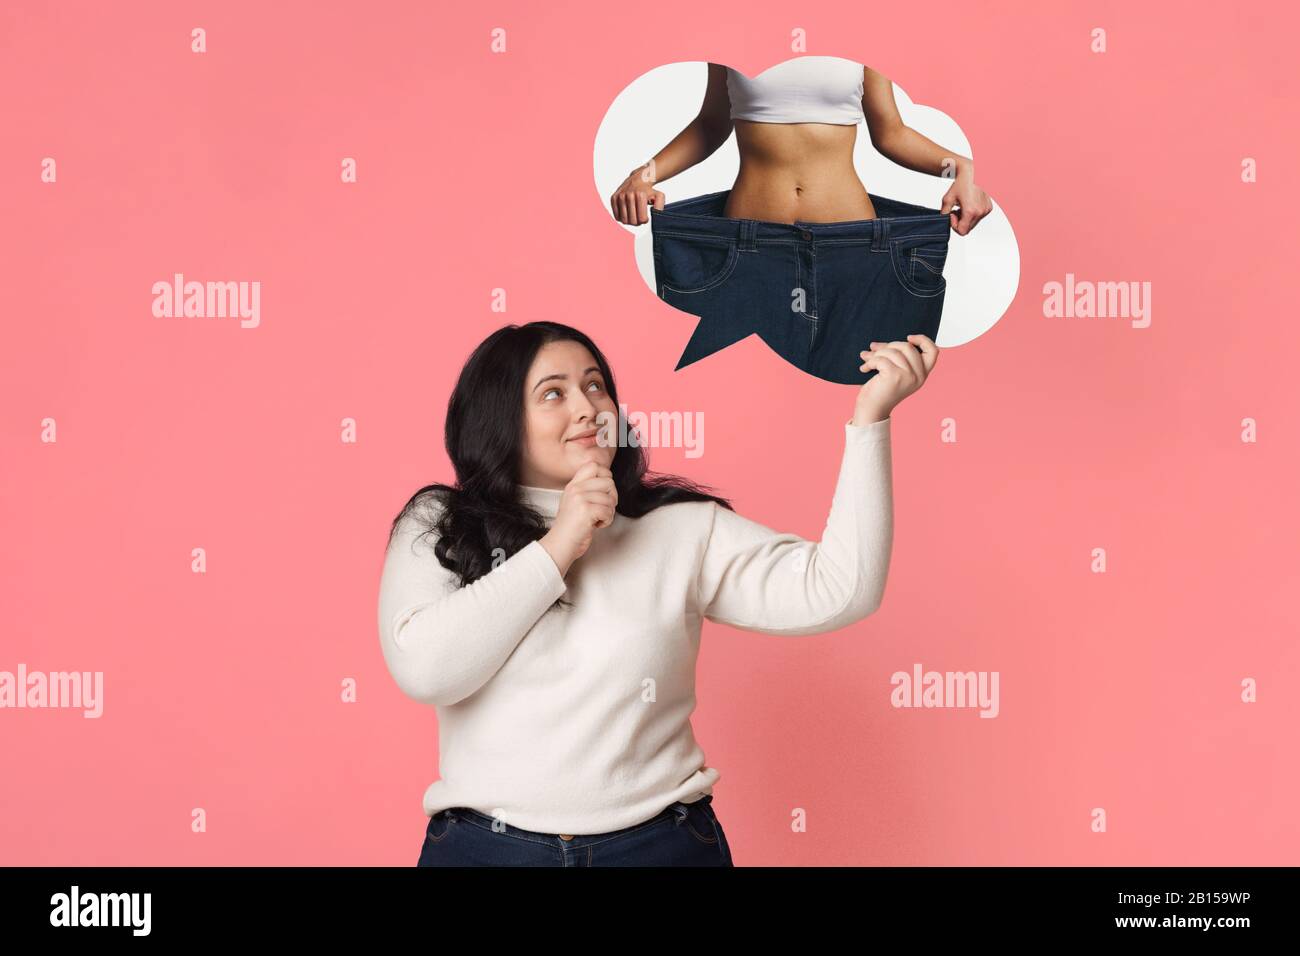 Overweight girl dreaming about slim fit body Stock Photo